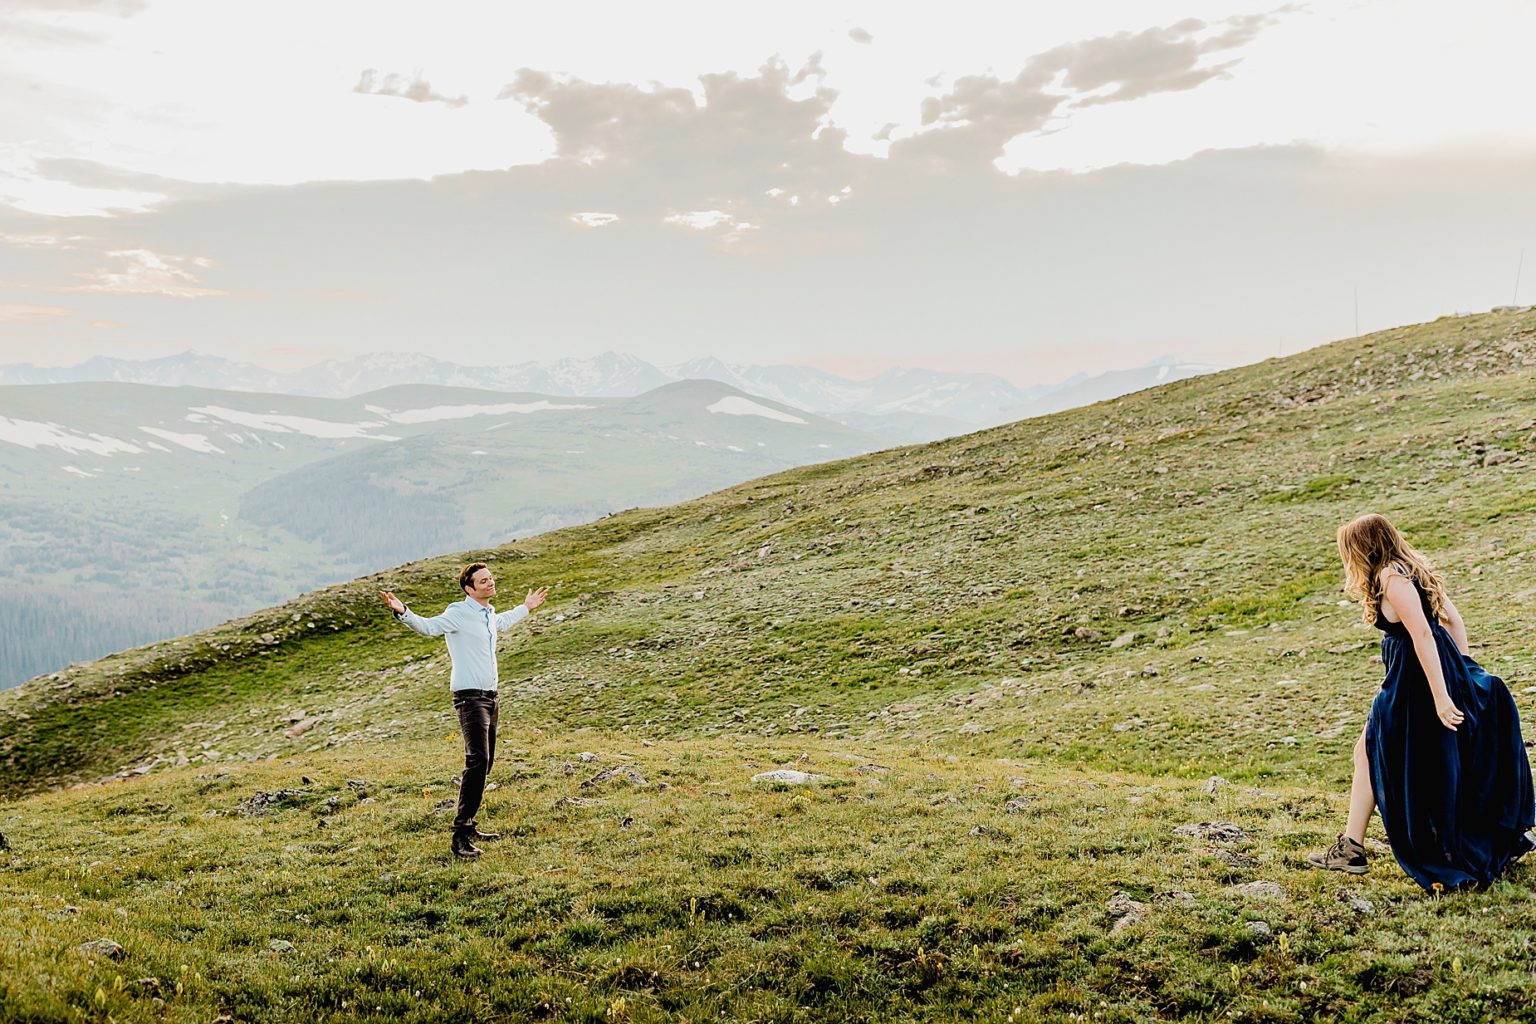 woman gets ready to run into man's arms for a big hug in front of the stunning Rocky Mountains in the green summer grass